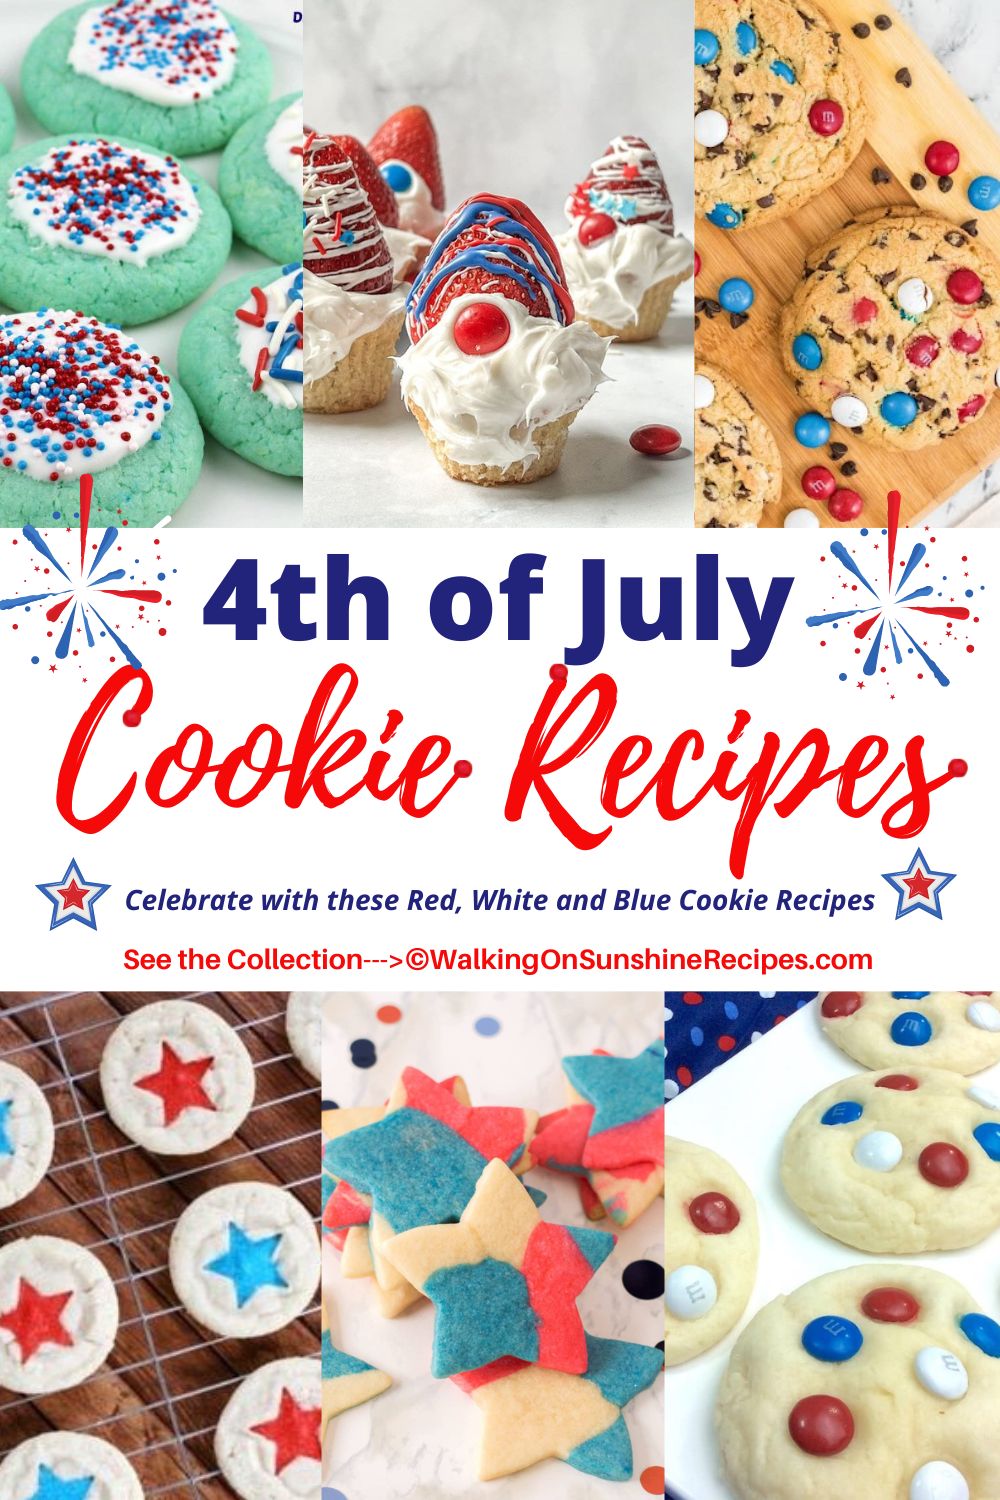 red, white and blue cookie recipes.